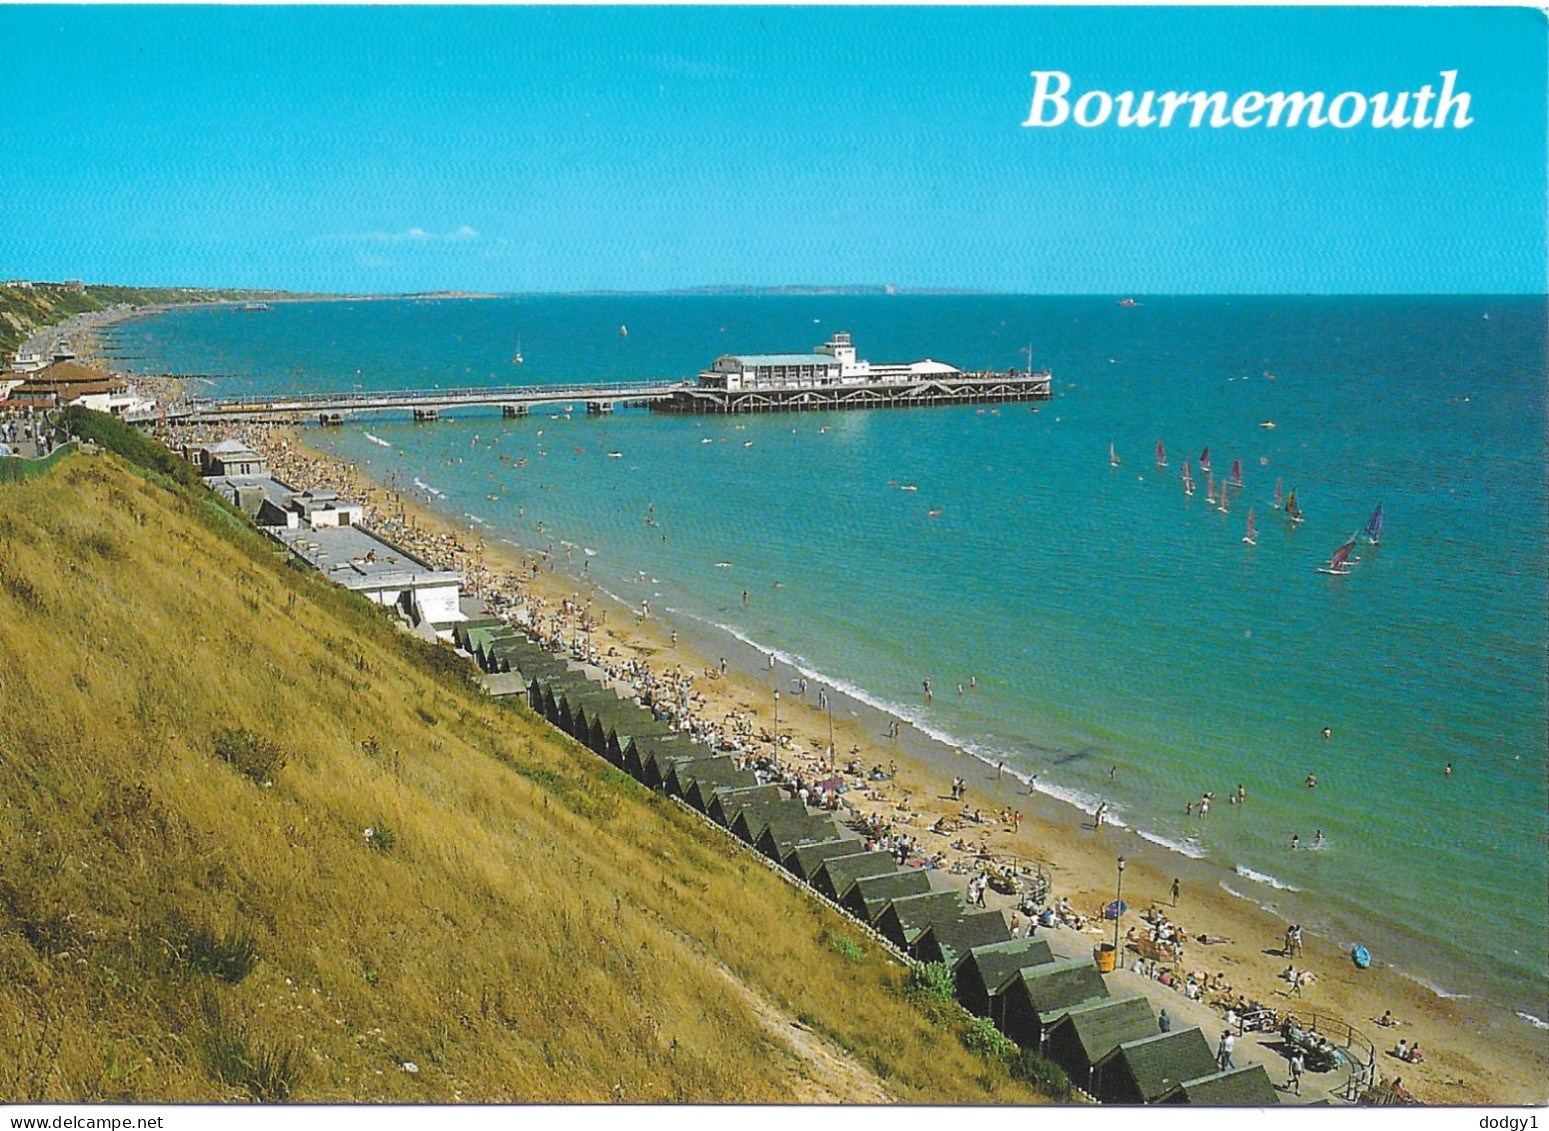 THE BEACH AND PIER, BOURNEMOUTH, DORSET, ENGLAND. UNUSED POSTCARD   Zf8 - Bournemouth (from 1972)